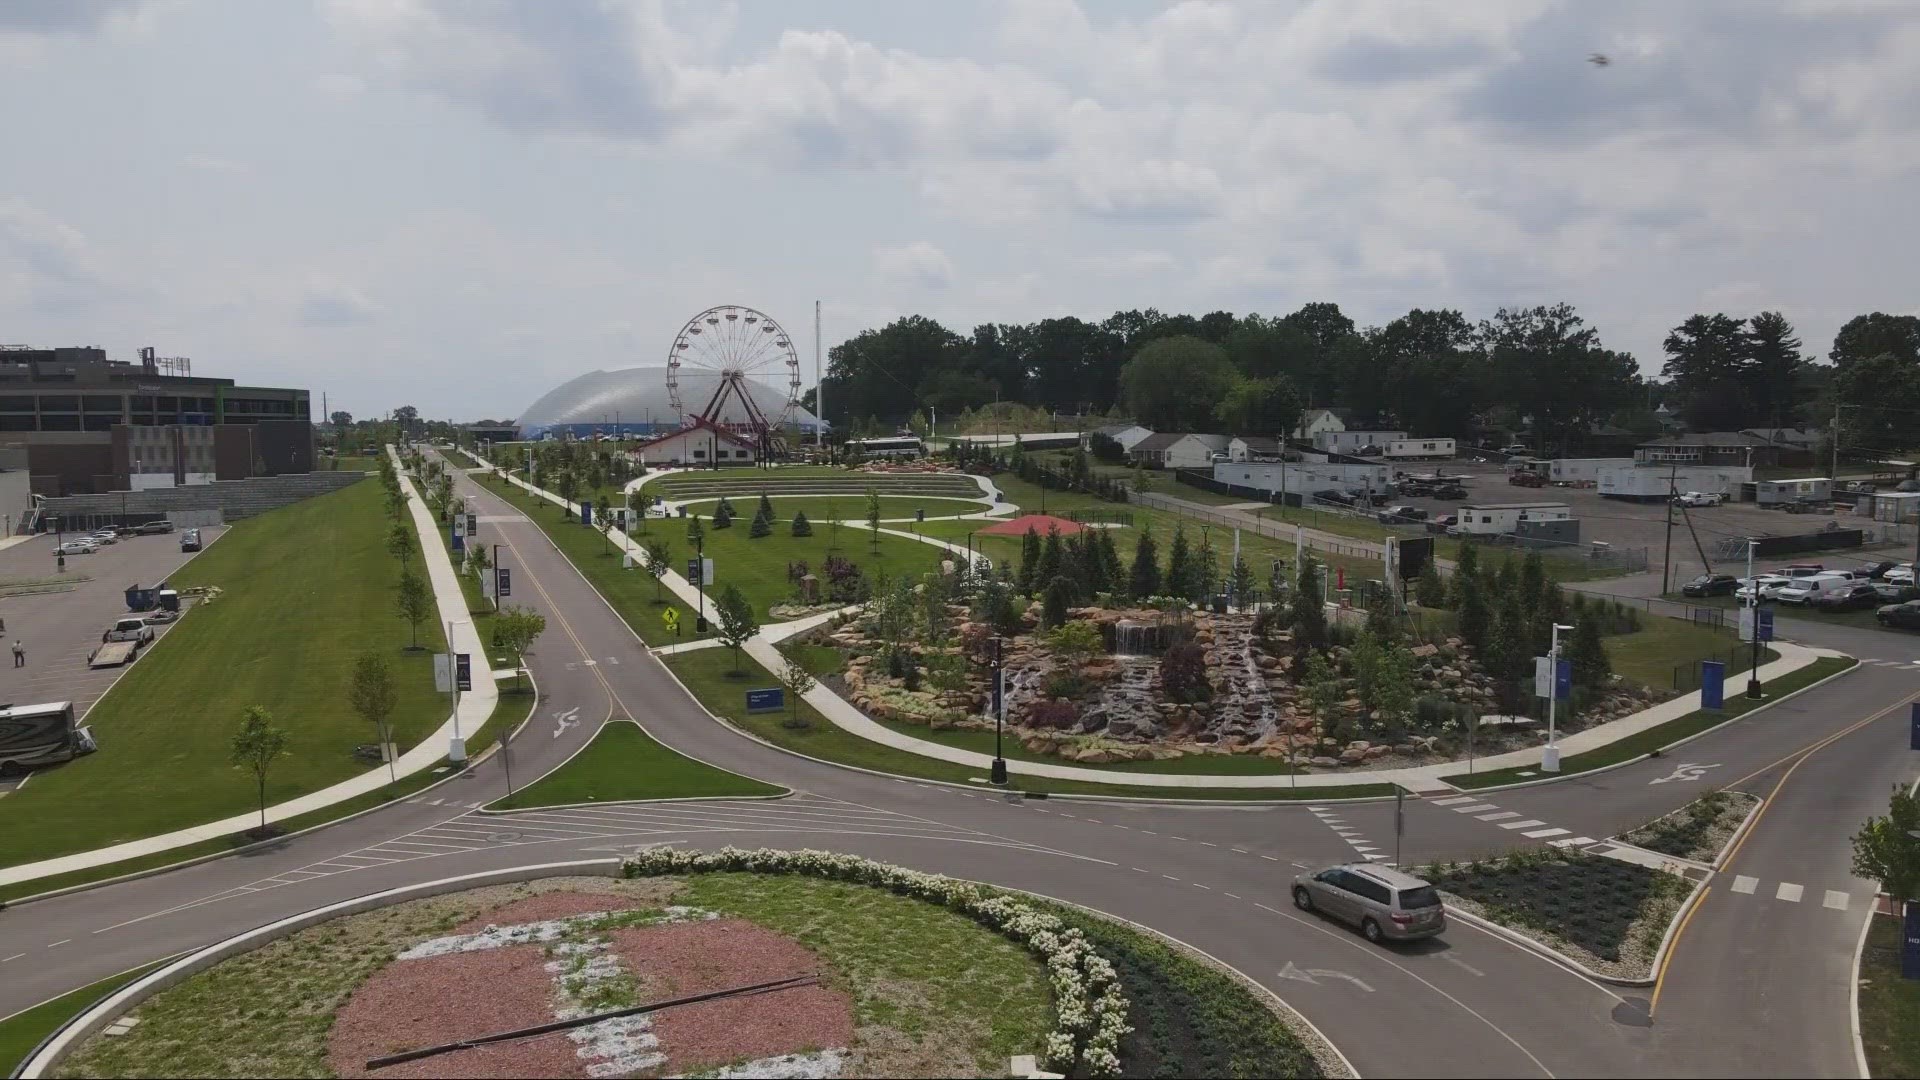 3News' Neil Fischer breaks down what new attractions and experiences you'll see at an updated Hall of Fame village!